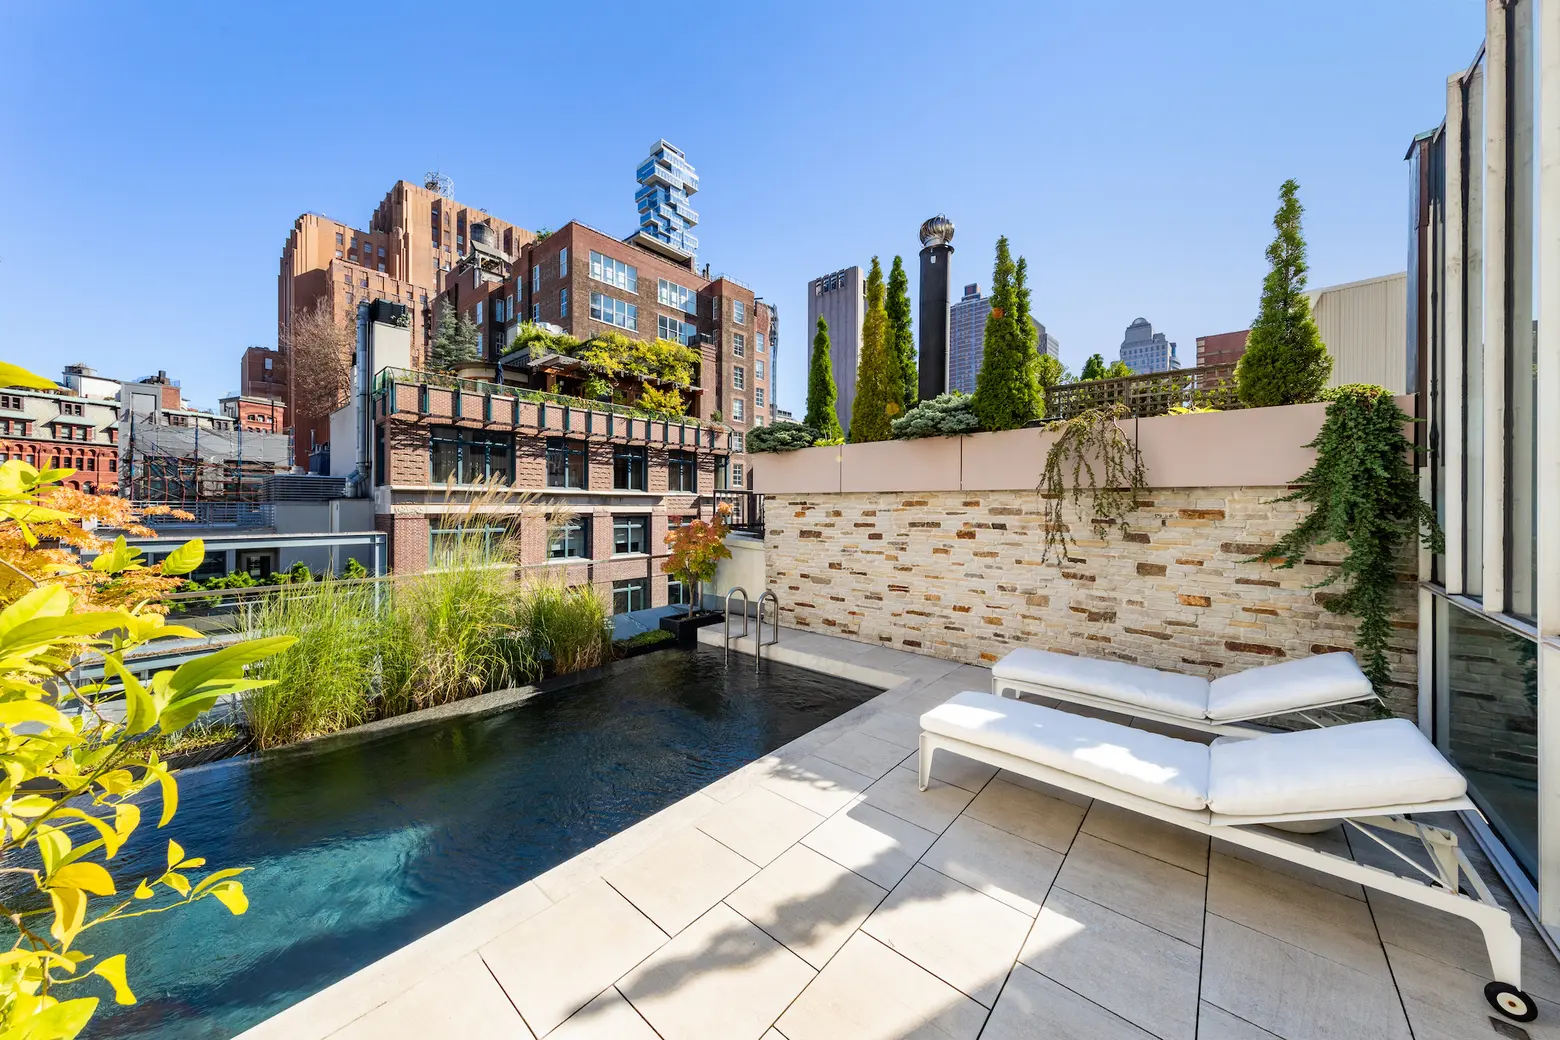 $40M brick-and-limestone townhouse in Tribeca has six floors topped by a rooftop pool